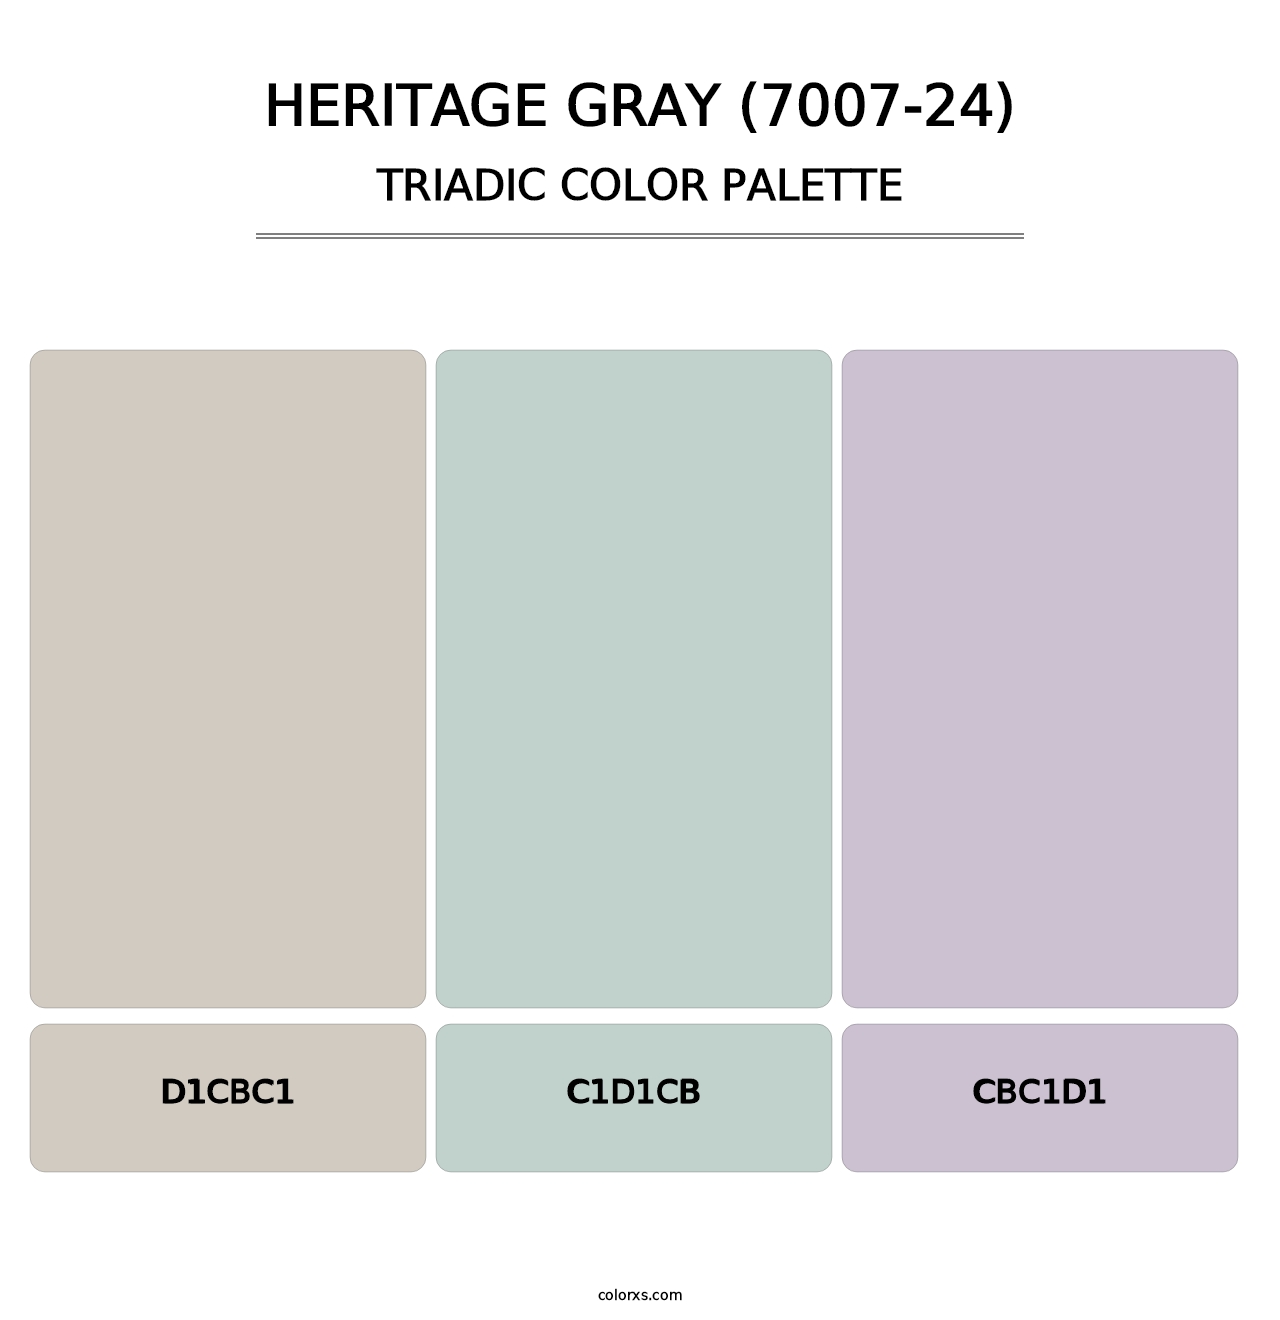 Heritage Gray (7007-24) - Triadic Color Palette